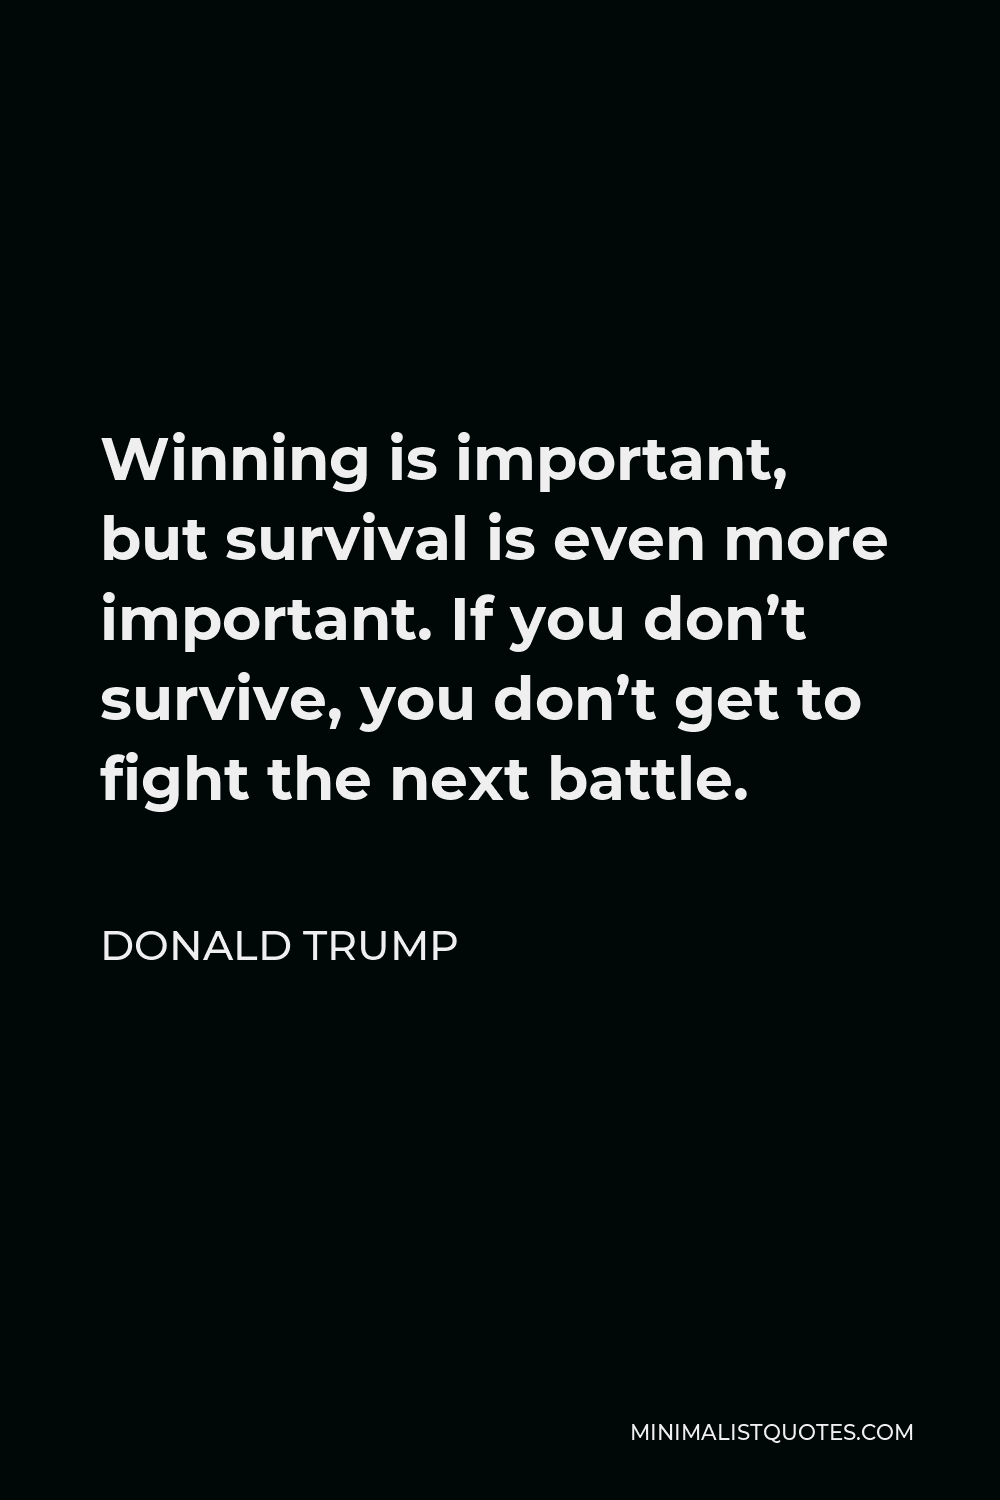 Donald Trump Quote - Winning is important, but survival is even more important. If you don’t survive, you don’t get to fight the next battle.